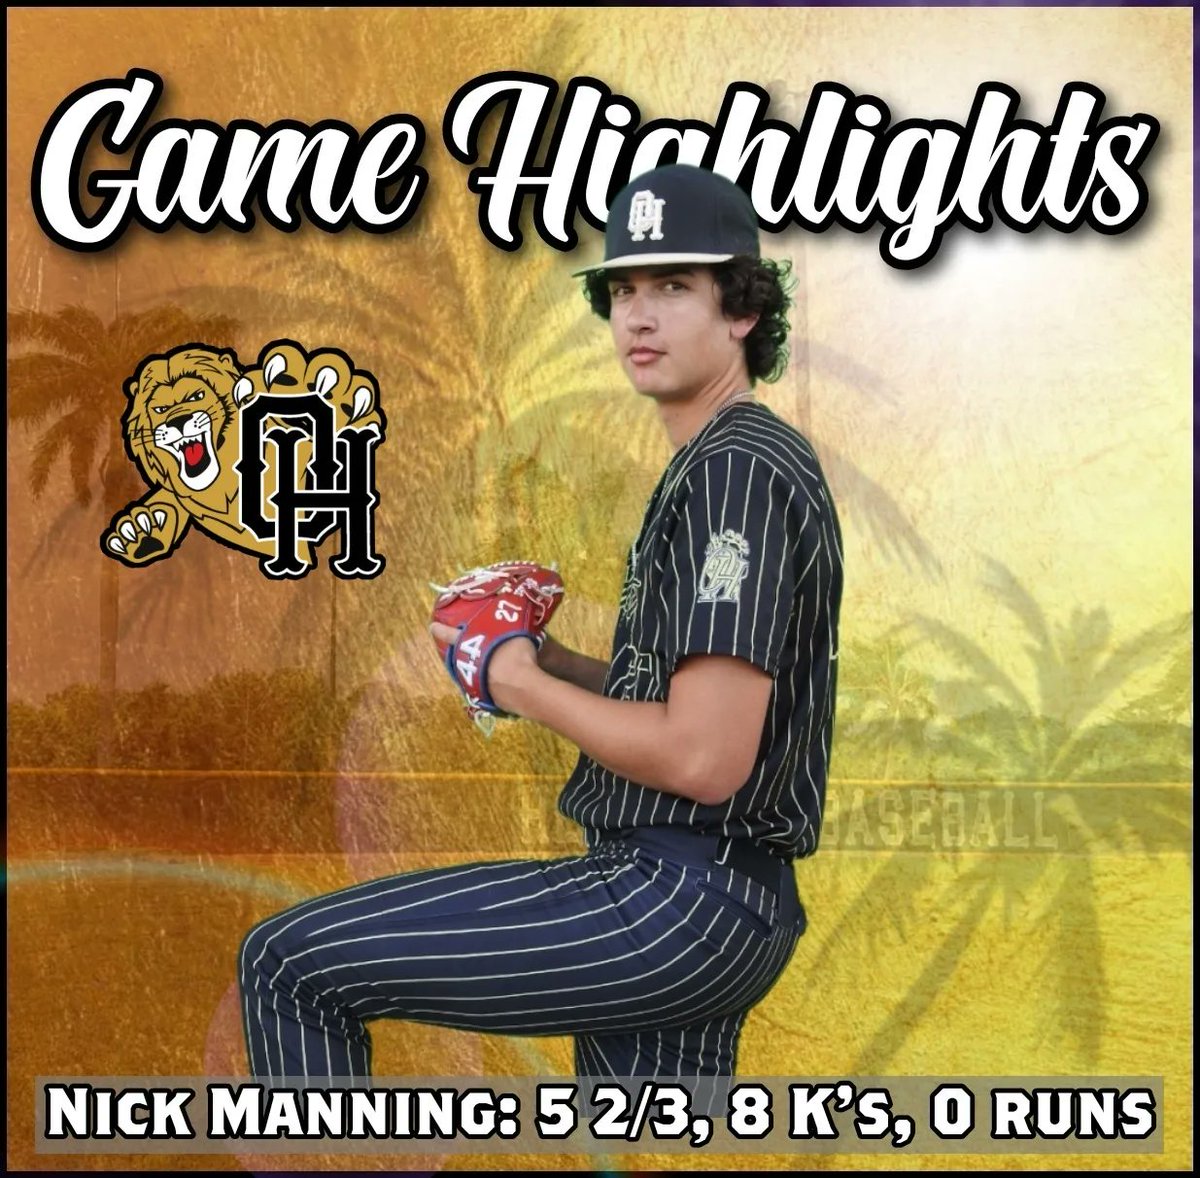 BIG win for your Olympic Heights Lions as they beat the Florida Christian Patriots by a score of 1-0. Nick Manning with a masterful performance on the mound tonight going 5 2/3 IP, 8 K's, 0 runs. Great overall team win. The Lions are back at it on Tuesday at Forrest Hill